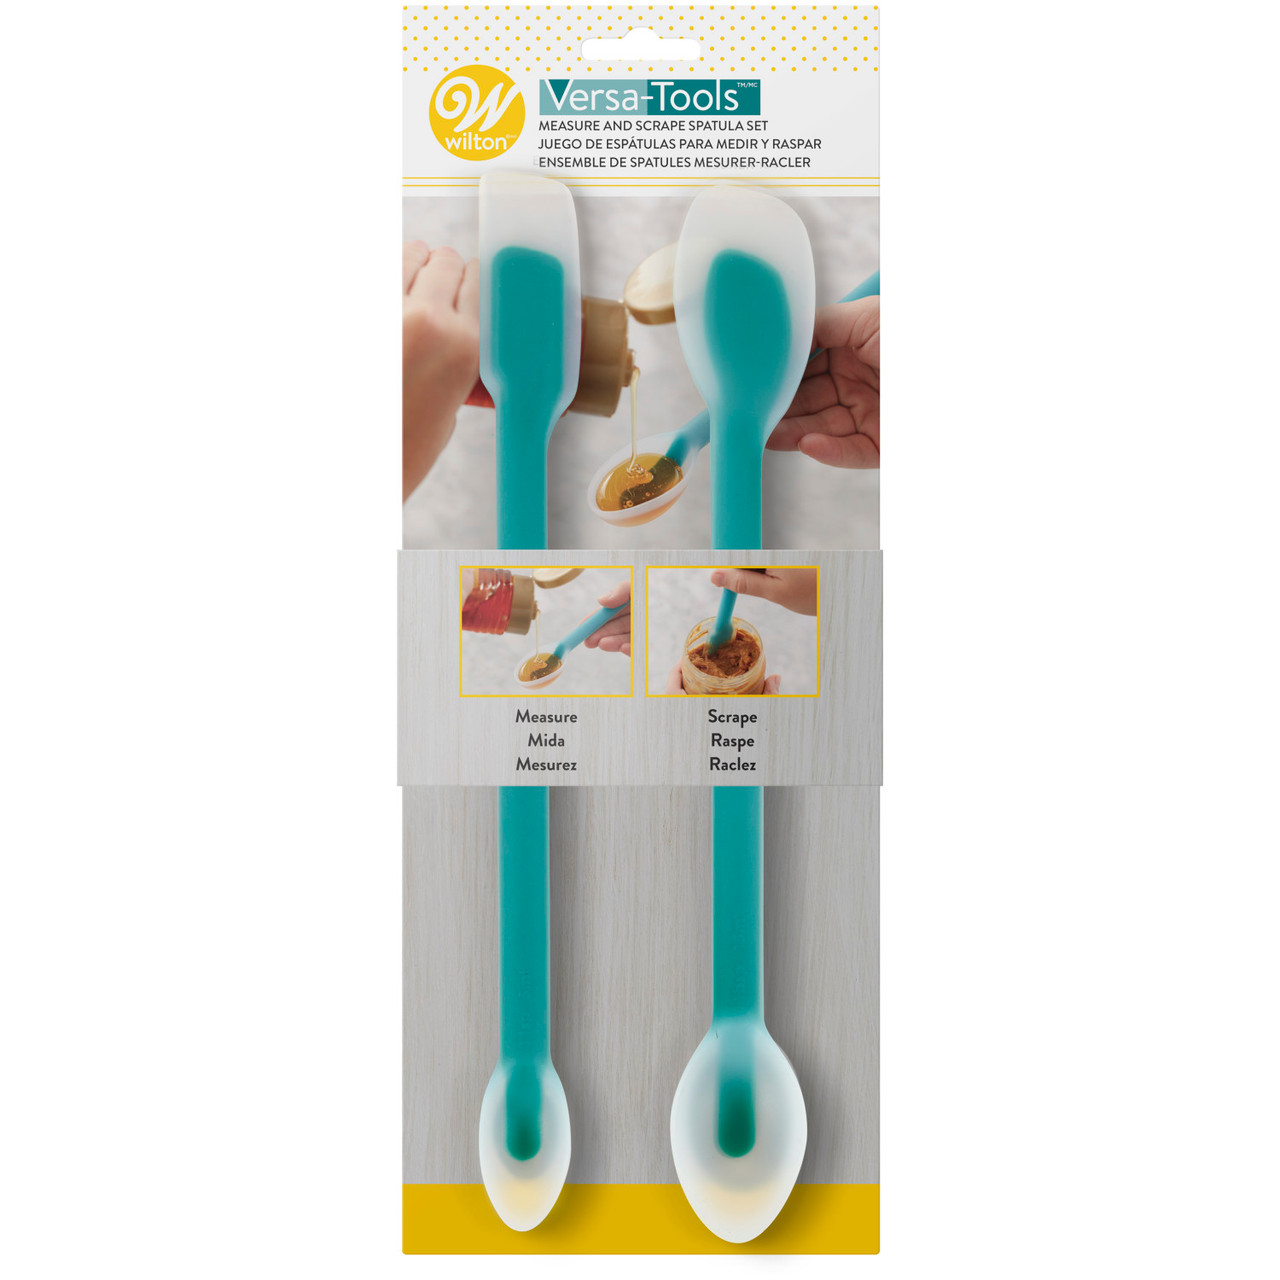 Versa-Tools Measure and Scrape Spatula Set for Cooking and Baking, 2-Piece  - Wilton